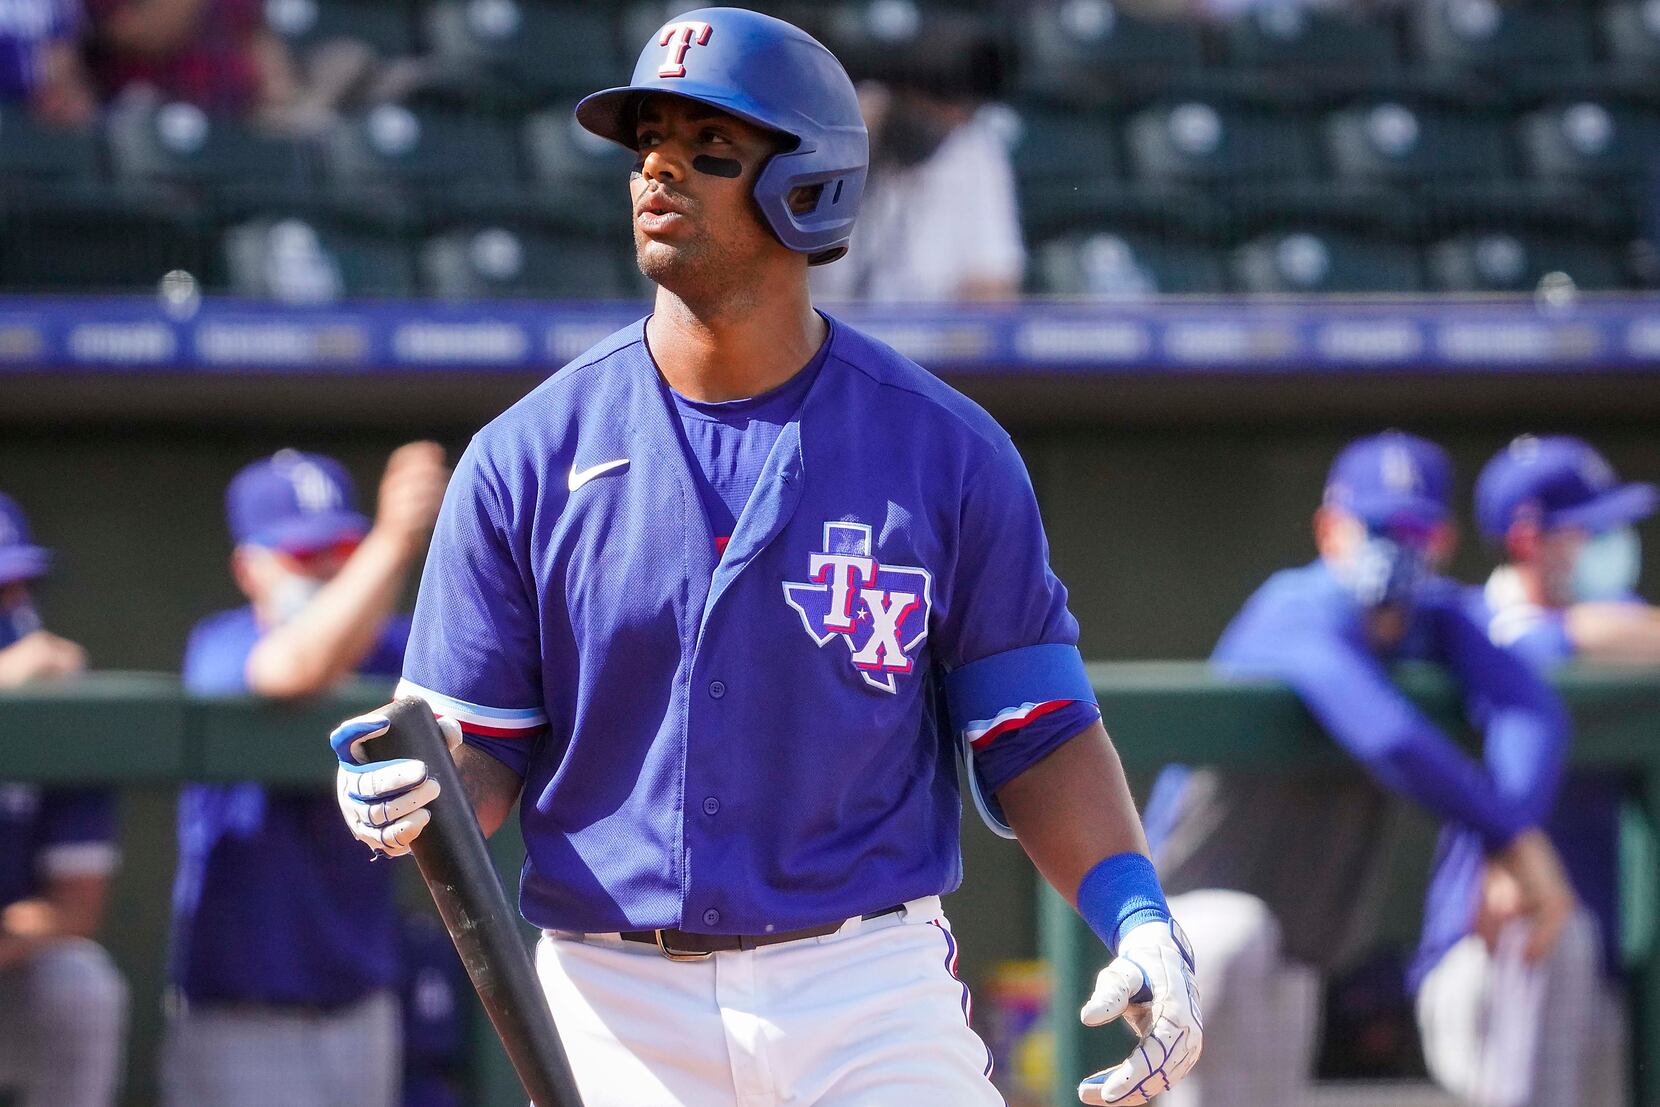 Khris Davis DFA'd by Rangers, who want look at young players